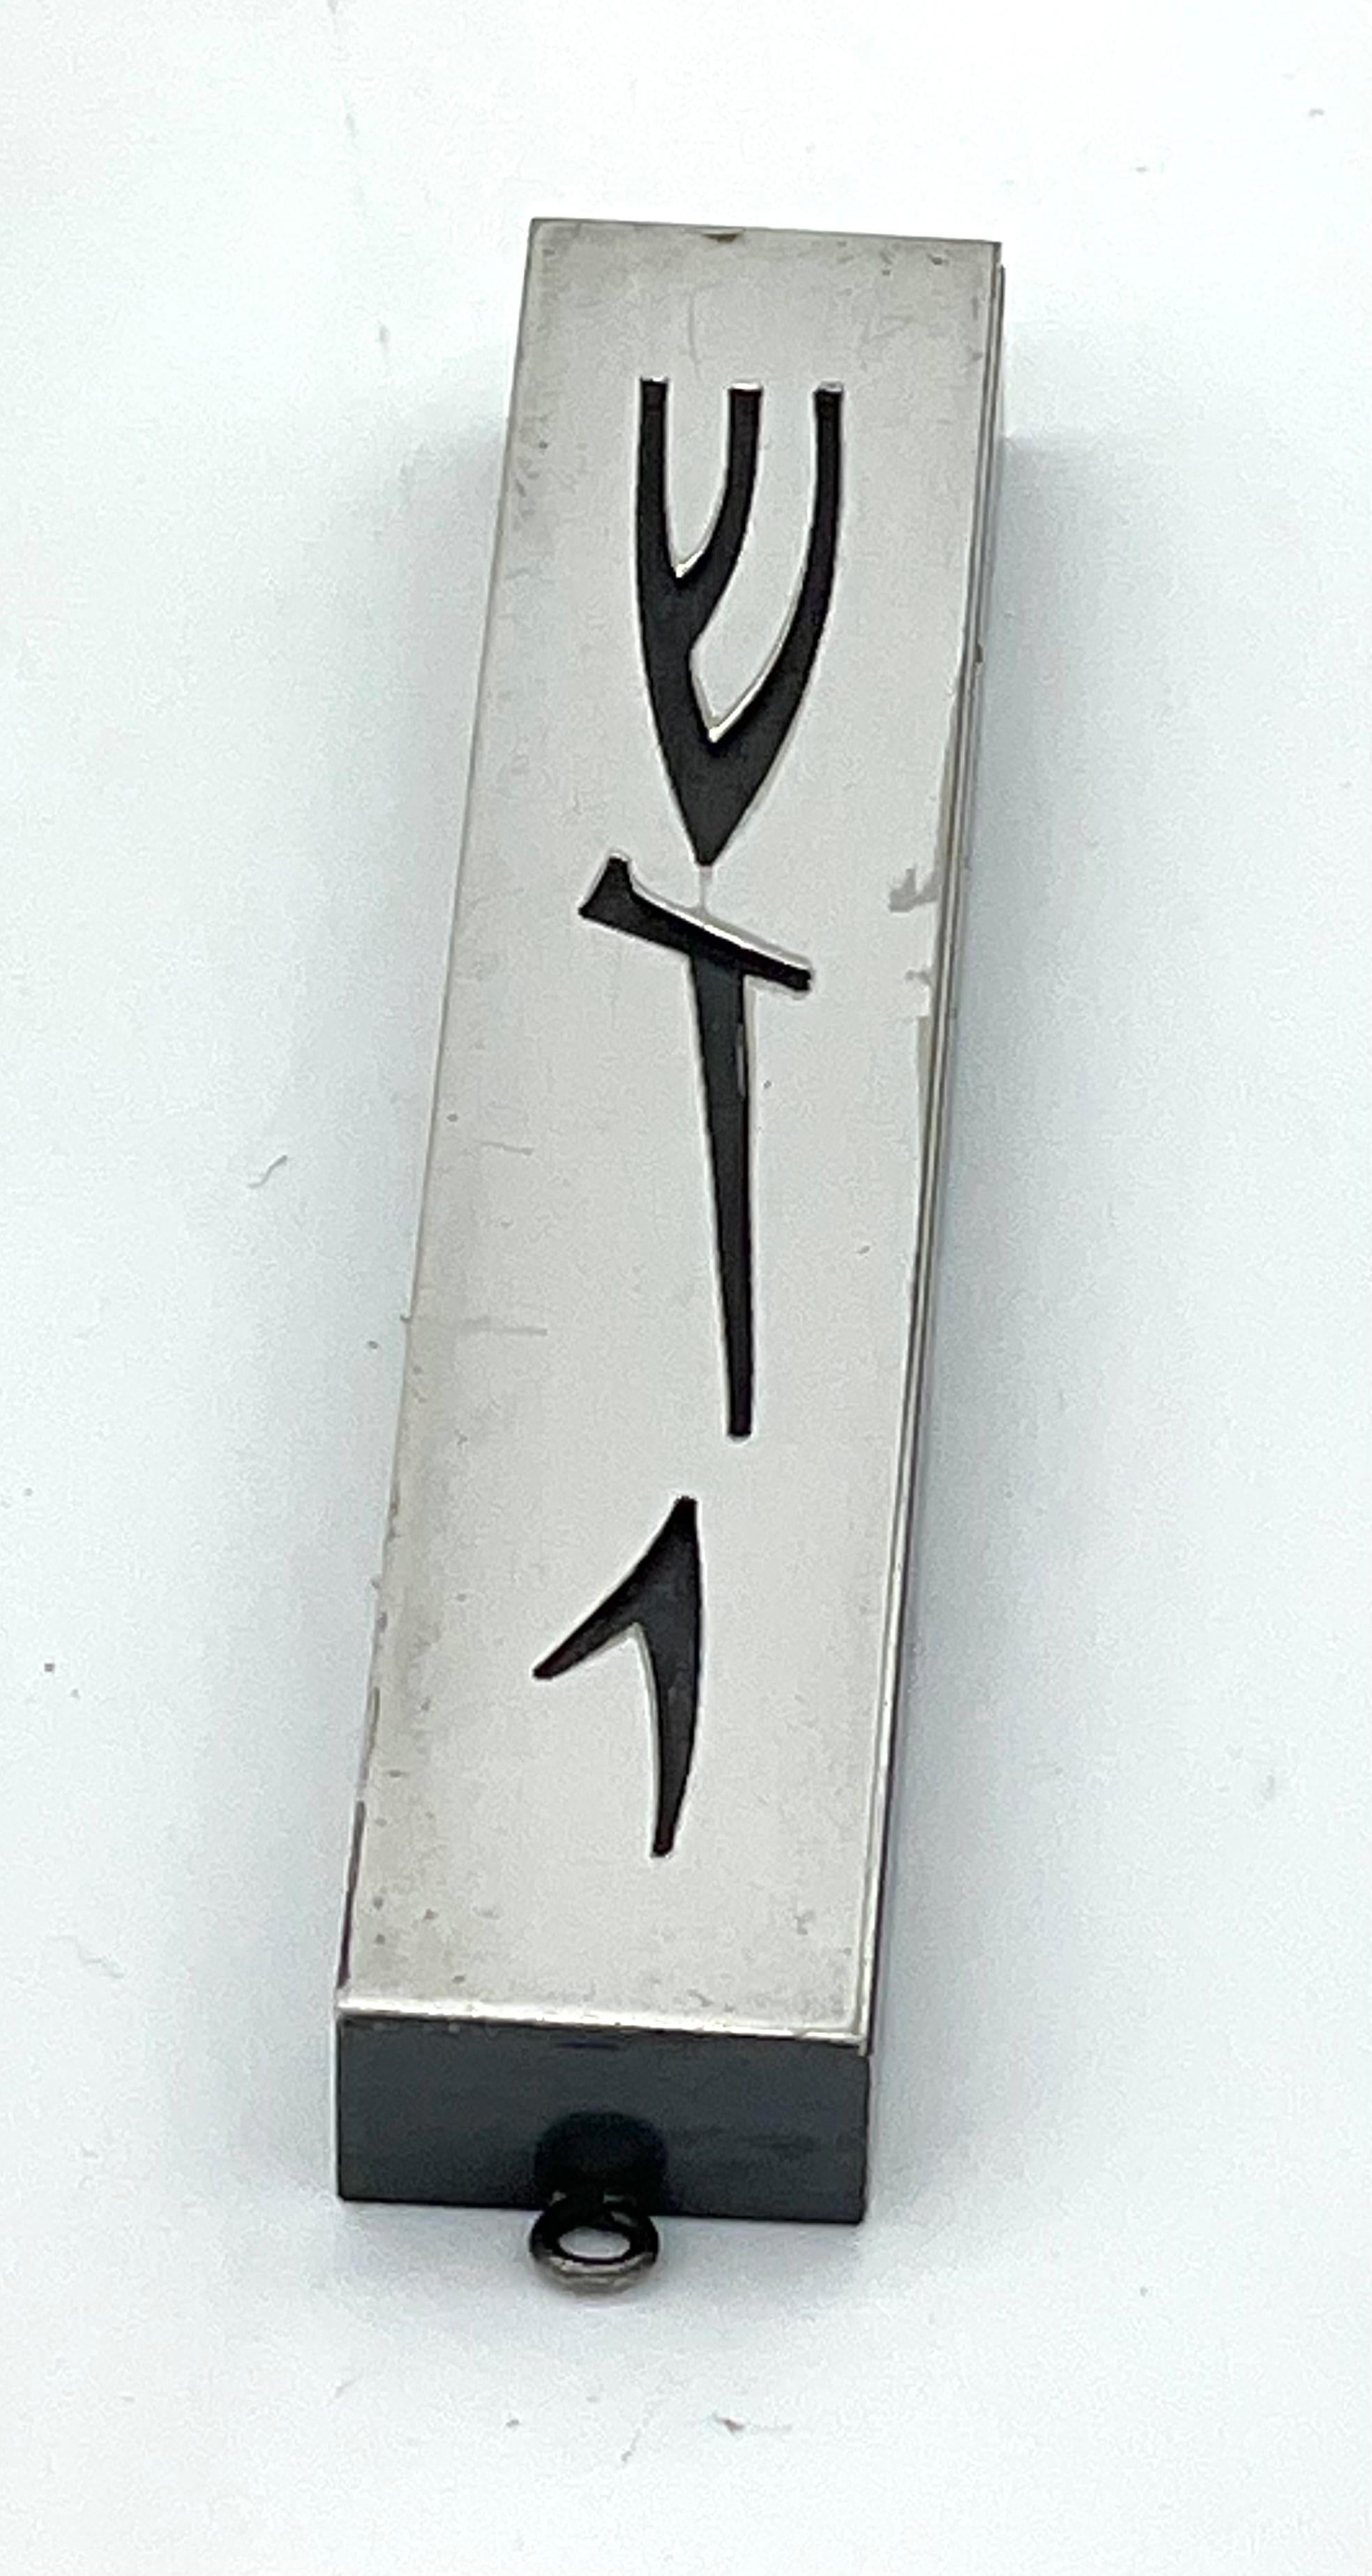 Handmade in Jerusalem, this Israeli silver-plated mezuzah is distinguished by its strikingly modern aesthetic. Brutalist design of Hebrew letters from top to bottom read, “Shaddai” used for one of the names of G-d. The letters displayed shows a